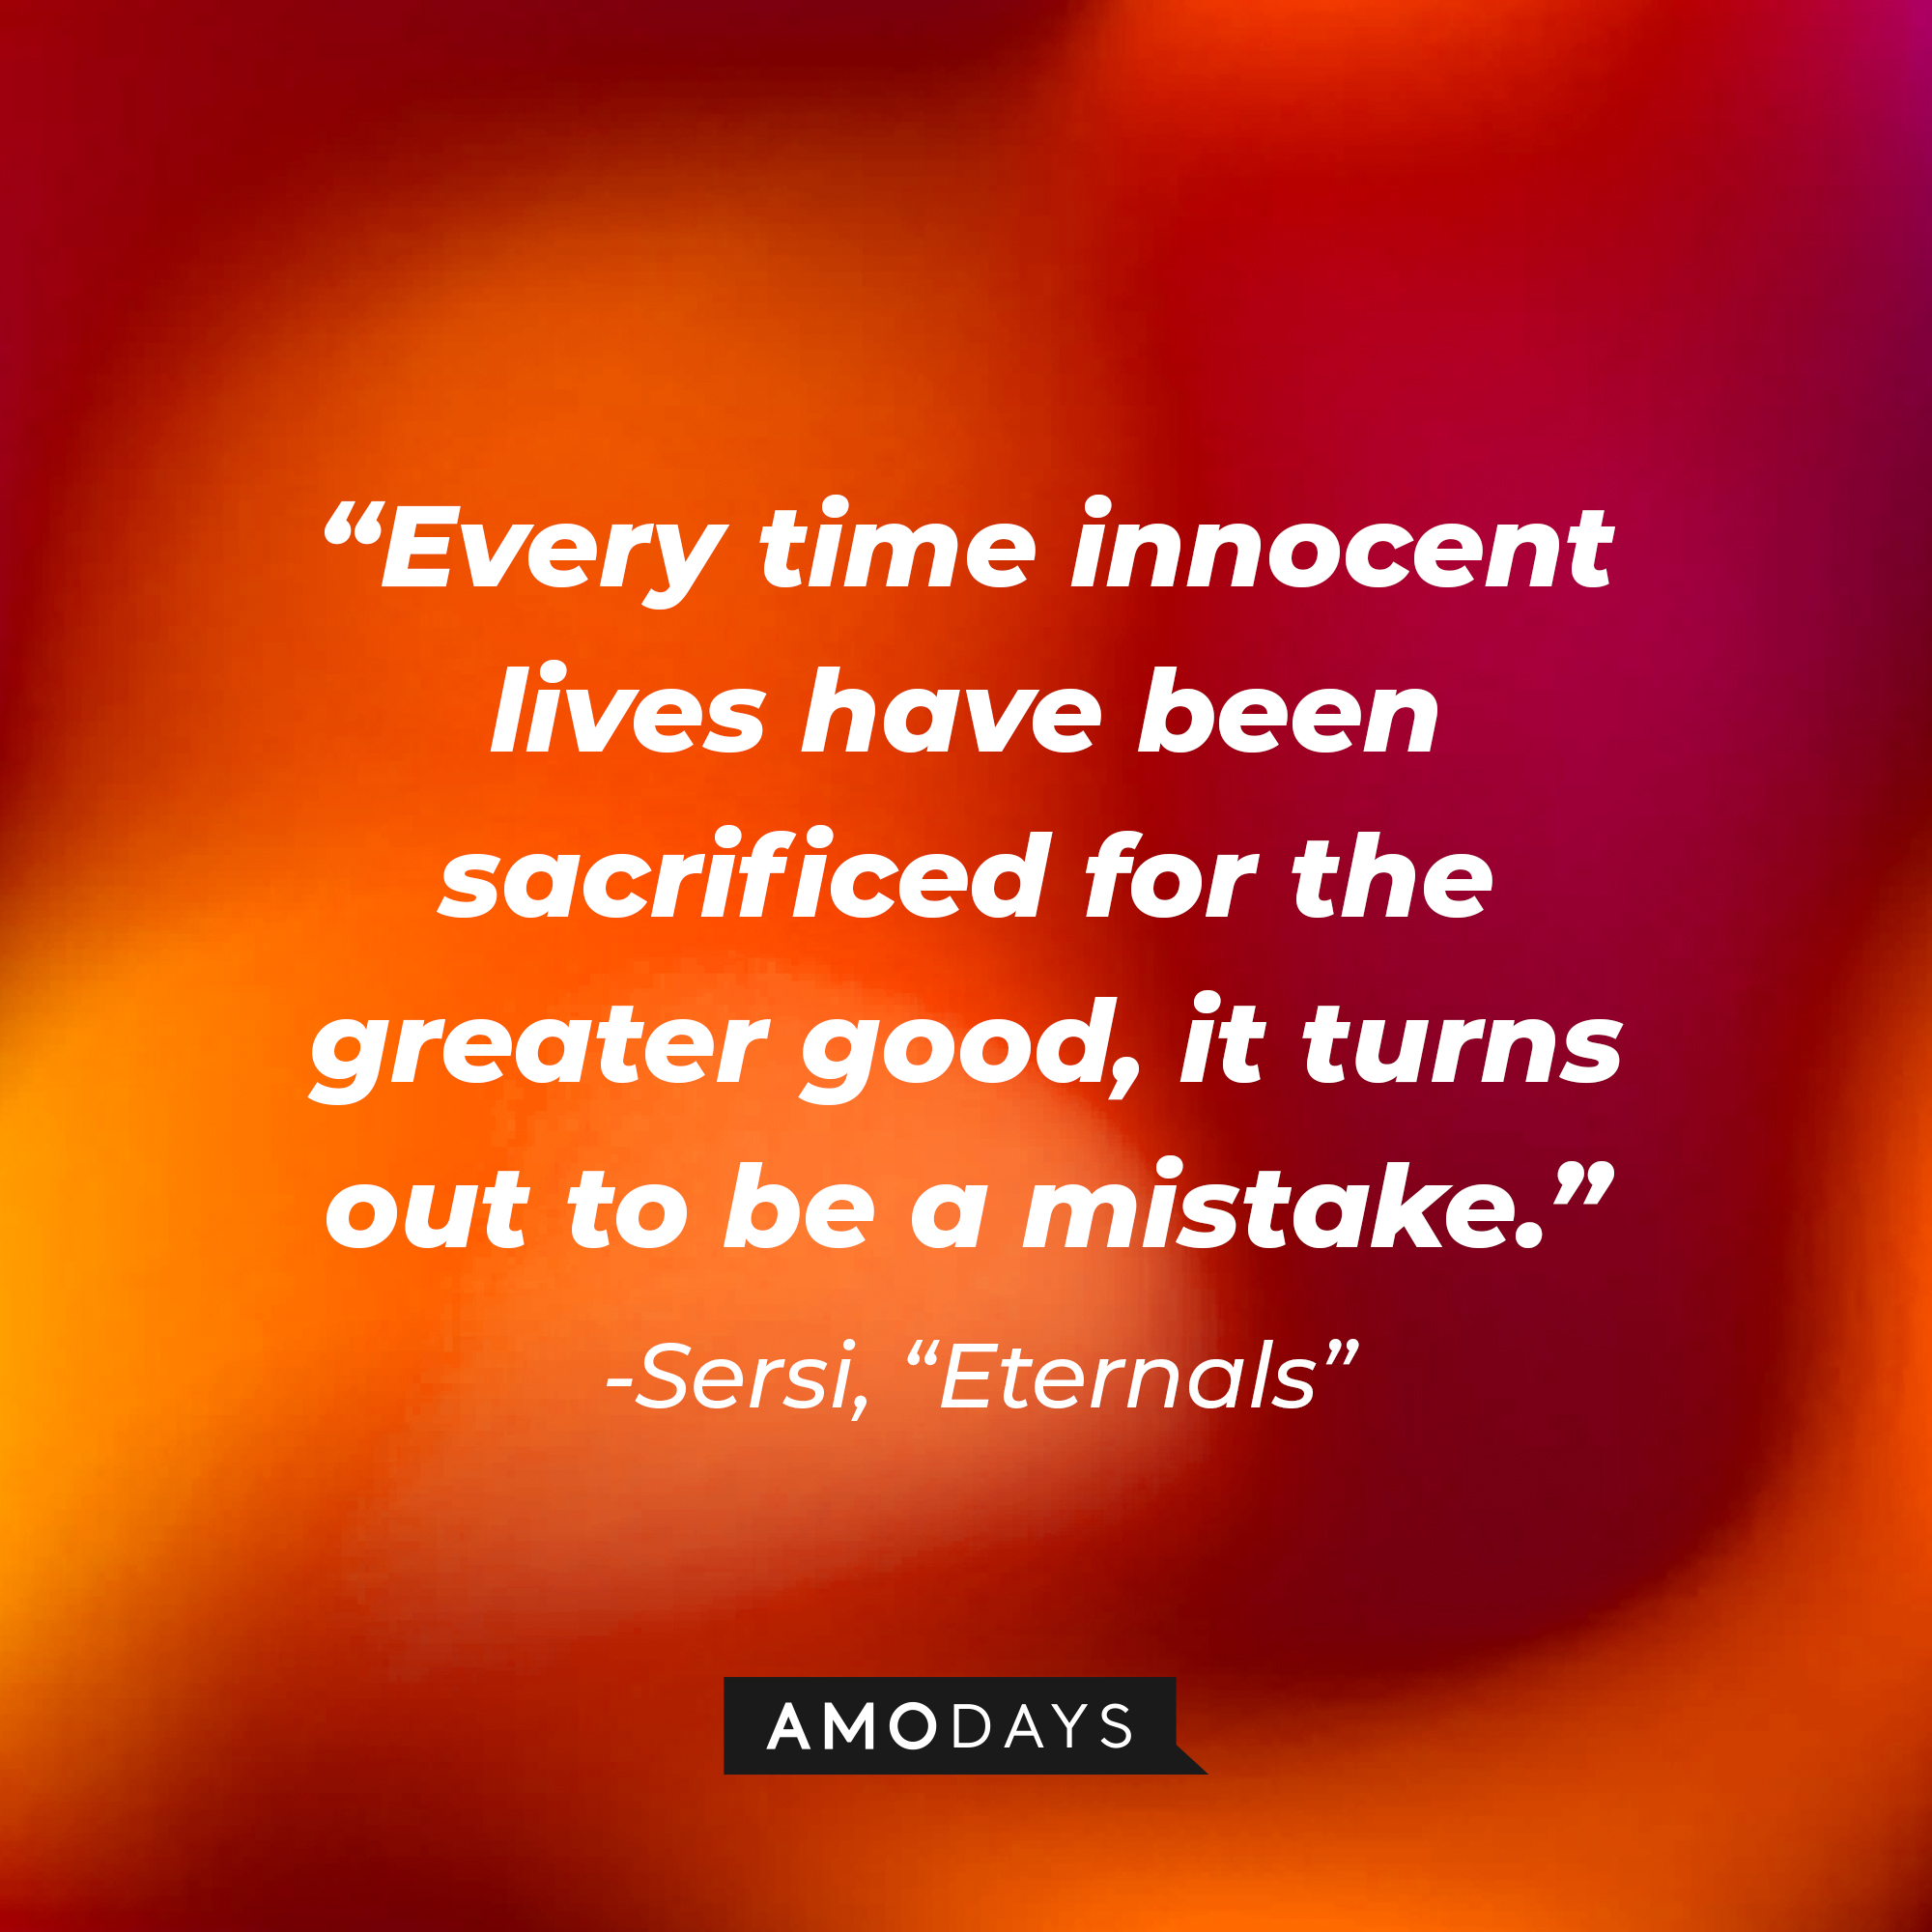 Sersi’s quote: "Every time innocent lives have been sacrificed for the greater good, it turns out to be a mistake." | Image: AmoDays